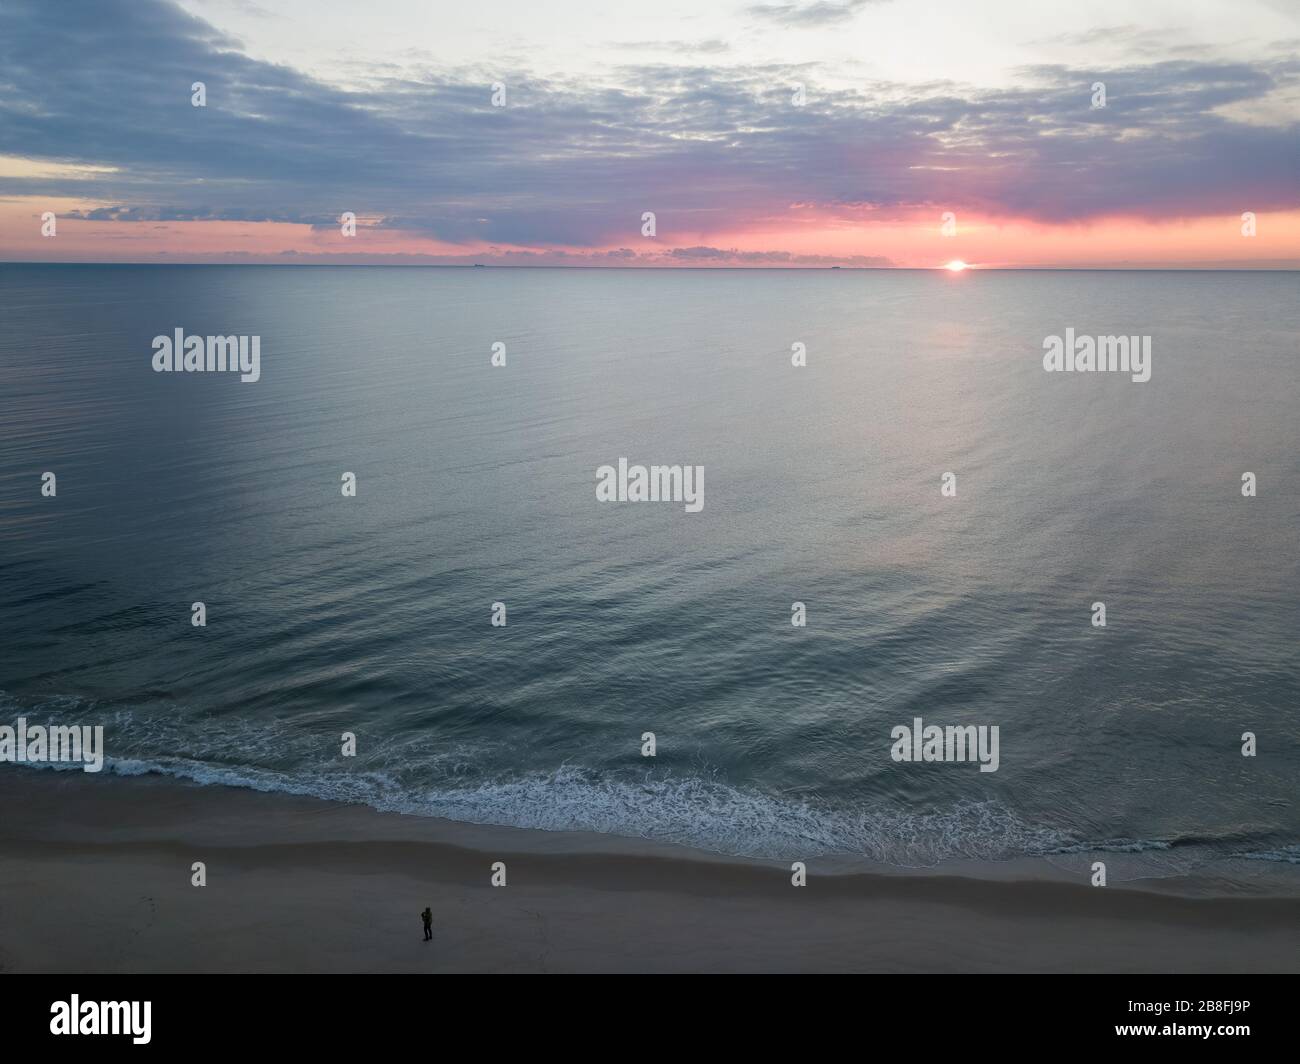 Arial view of social distancing during an Atlantic Ocean sunrise. Stock Photo